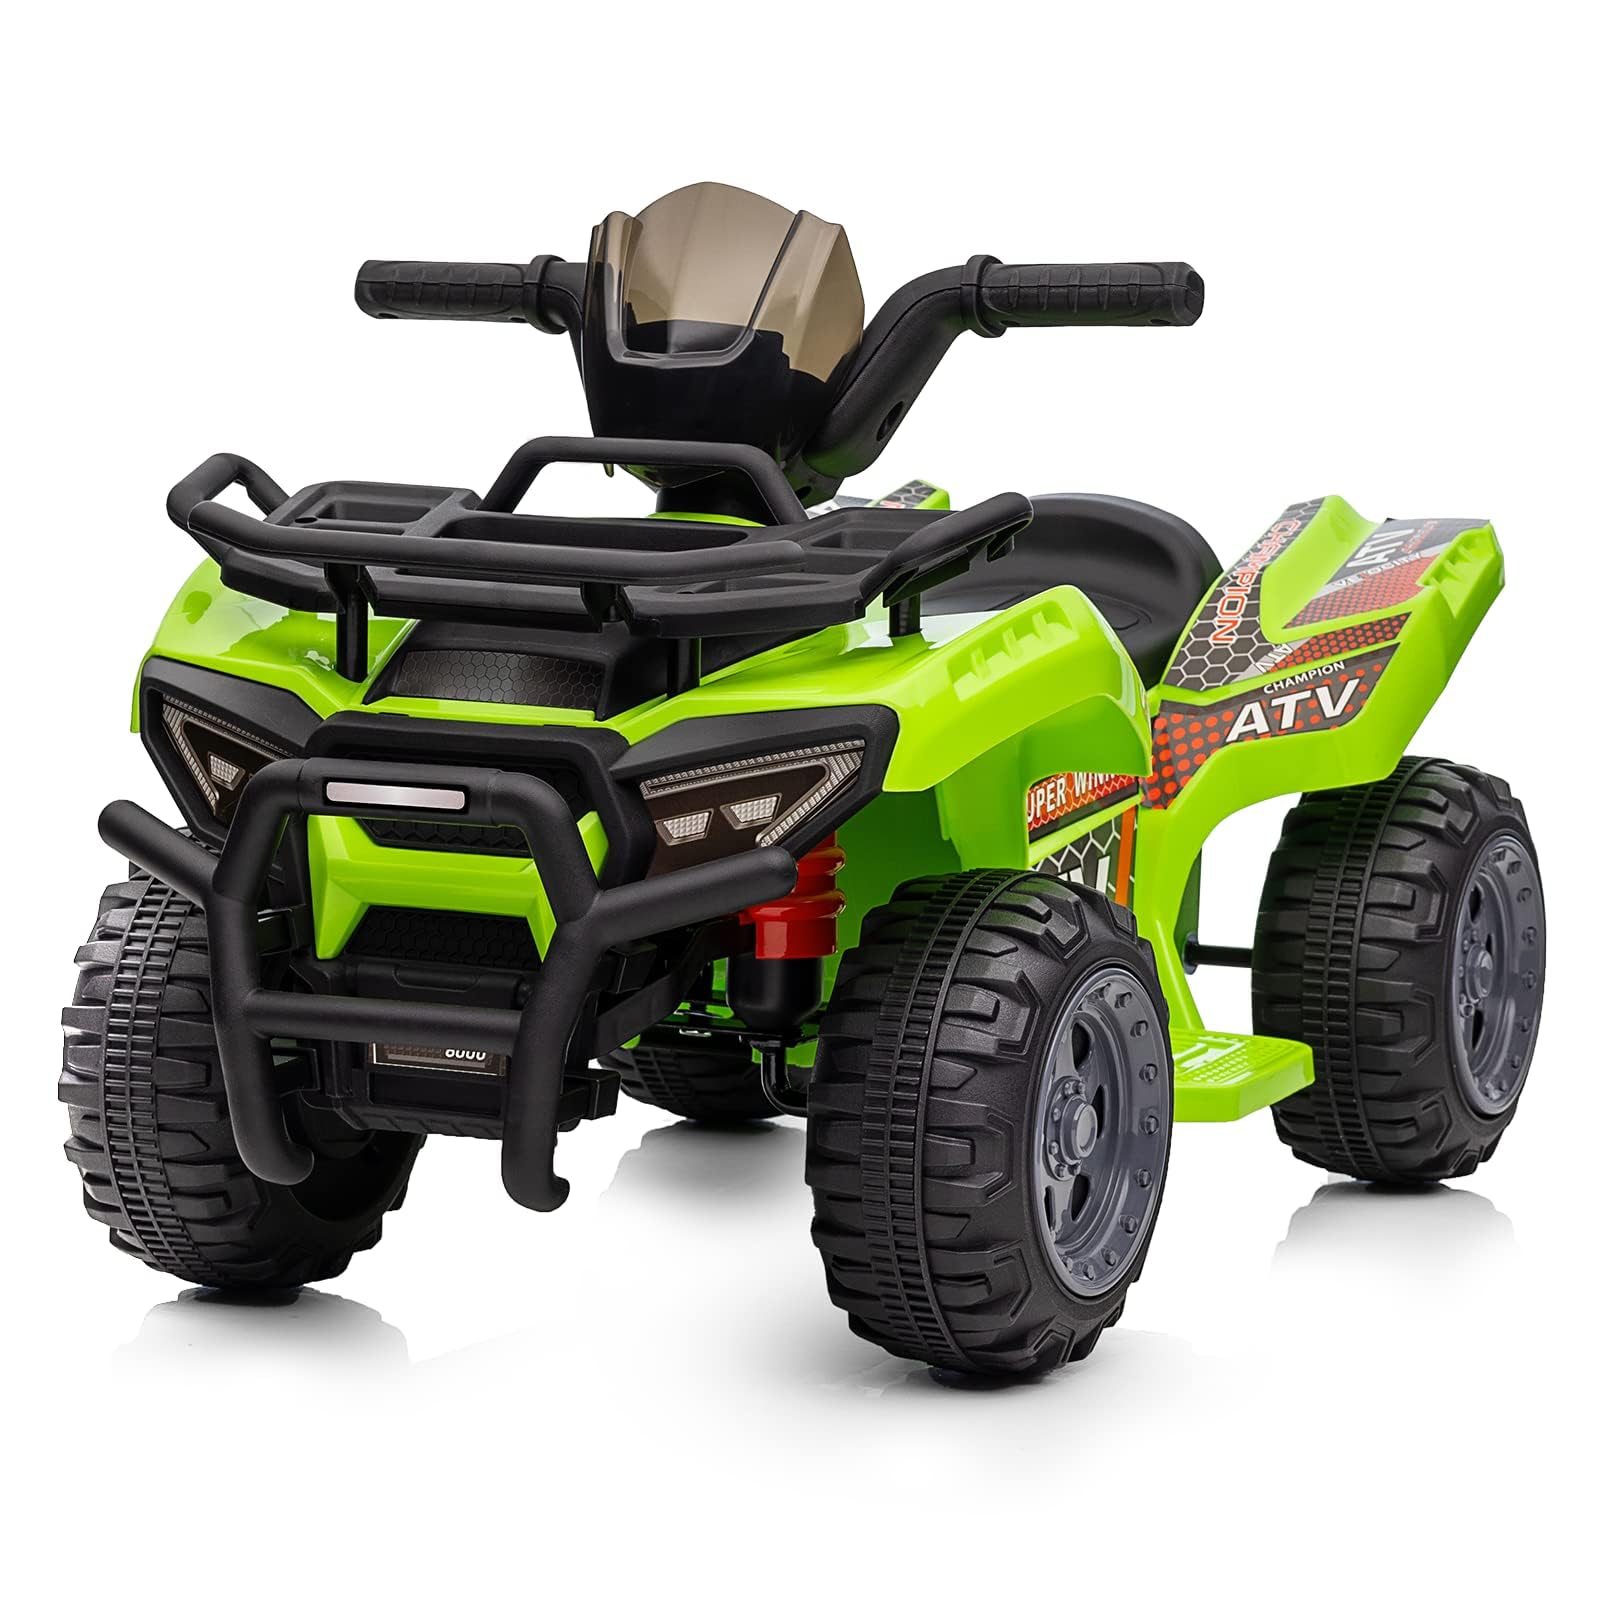 Hikiddo Kids ATV 4 Wheeler, 6V Ride-On Toy for Toddlers 1-3 Boys & Girls with Music, Forward & Reverse - Green